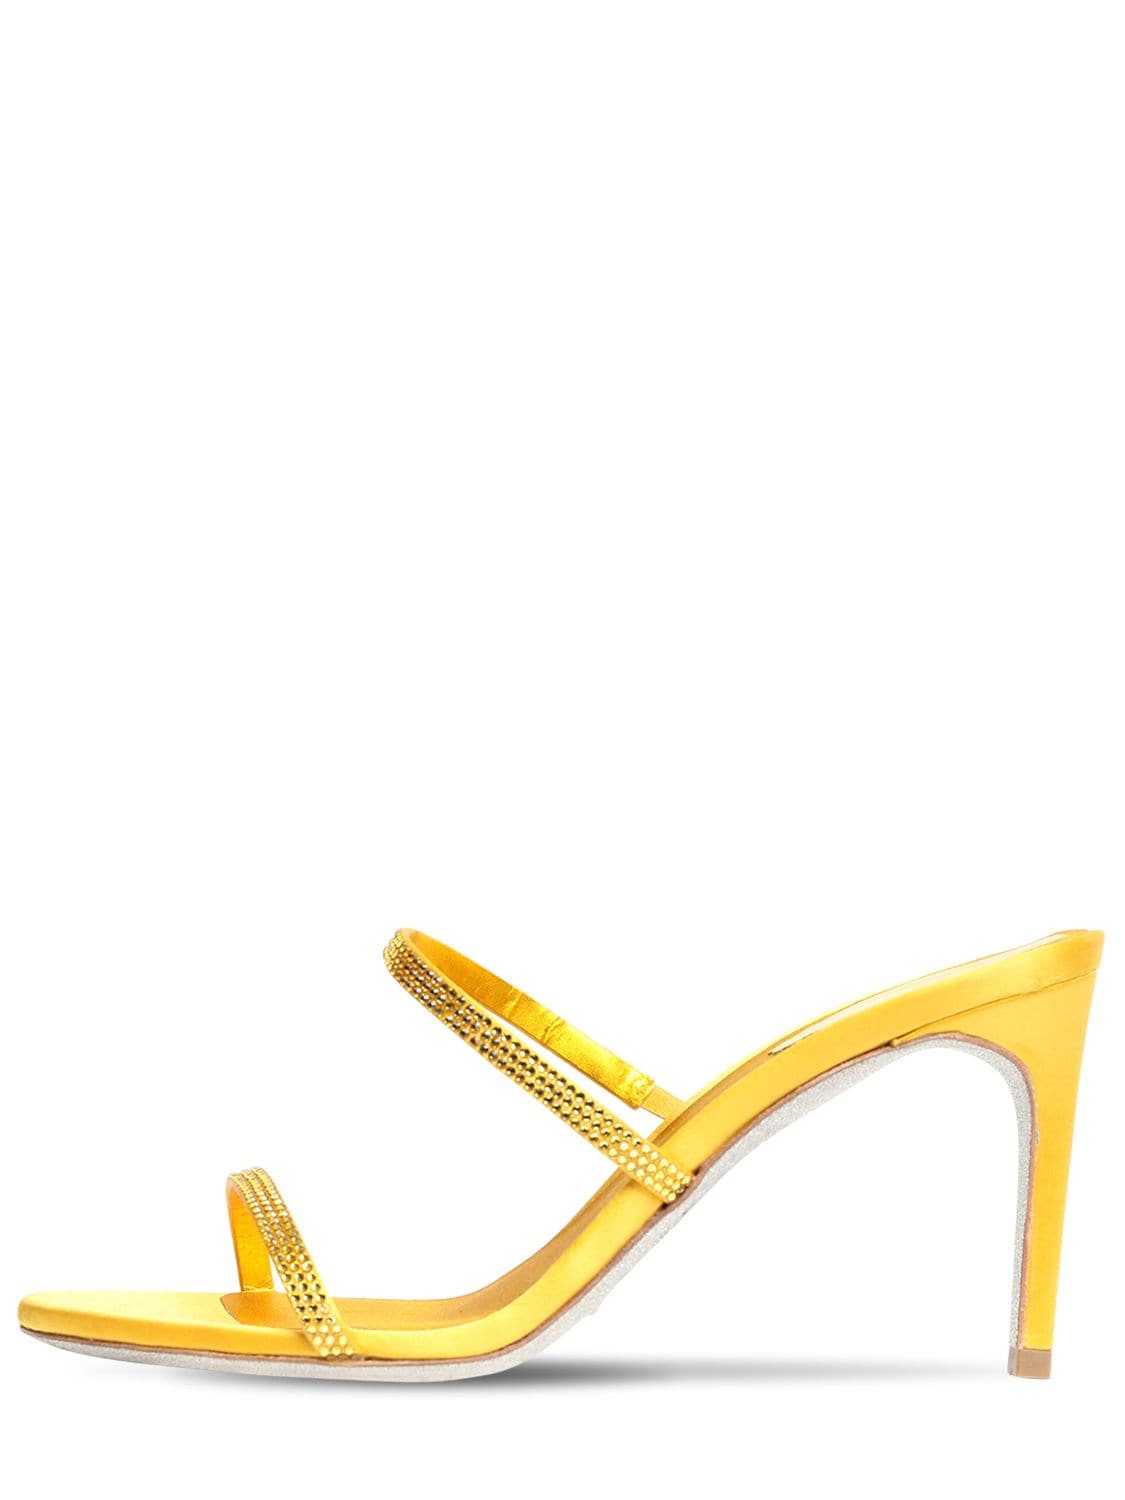 René Caovilla 80mm Embellished Satin Sandals In Yellow